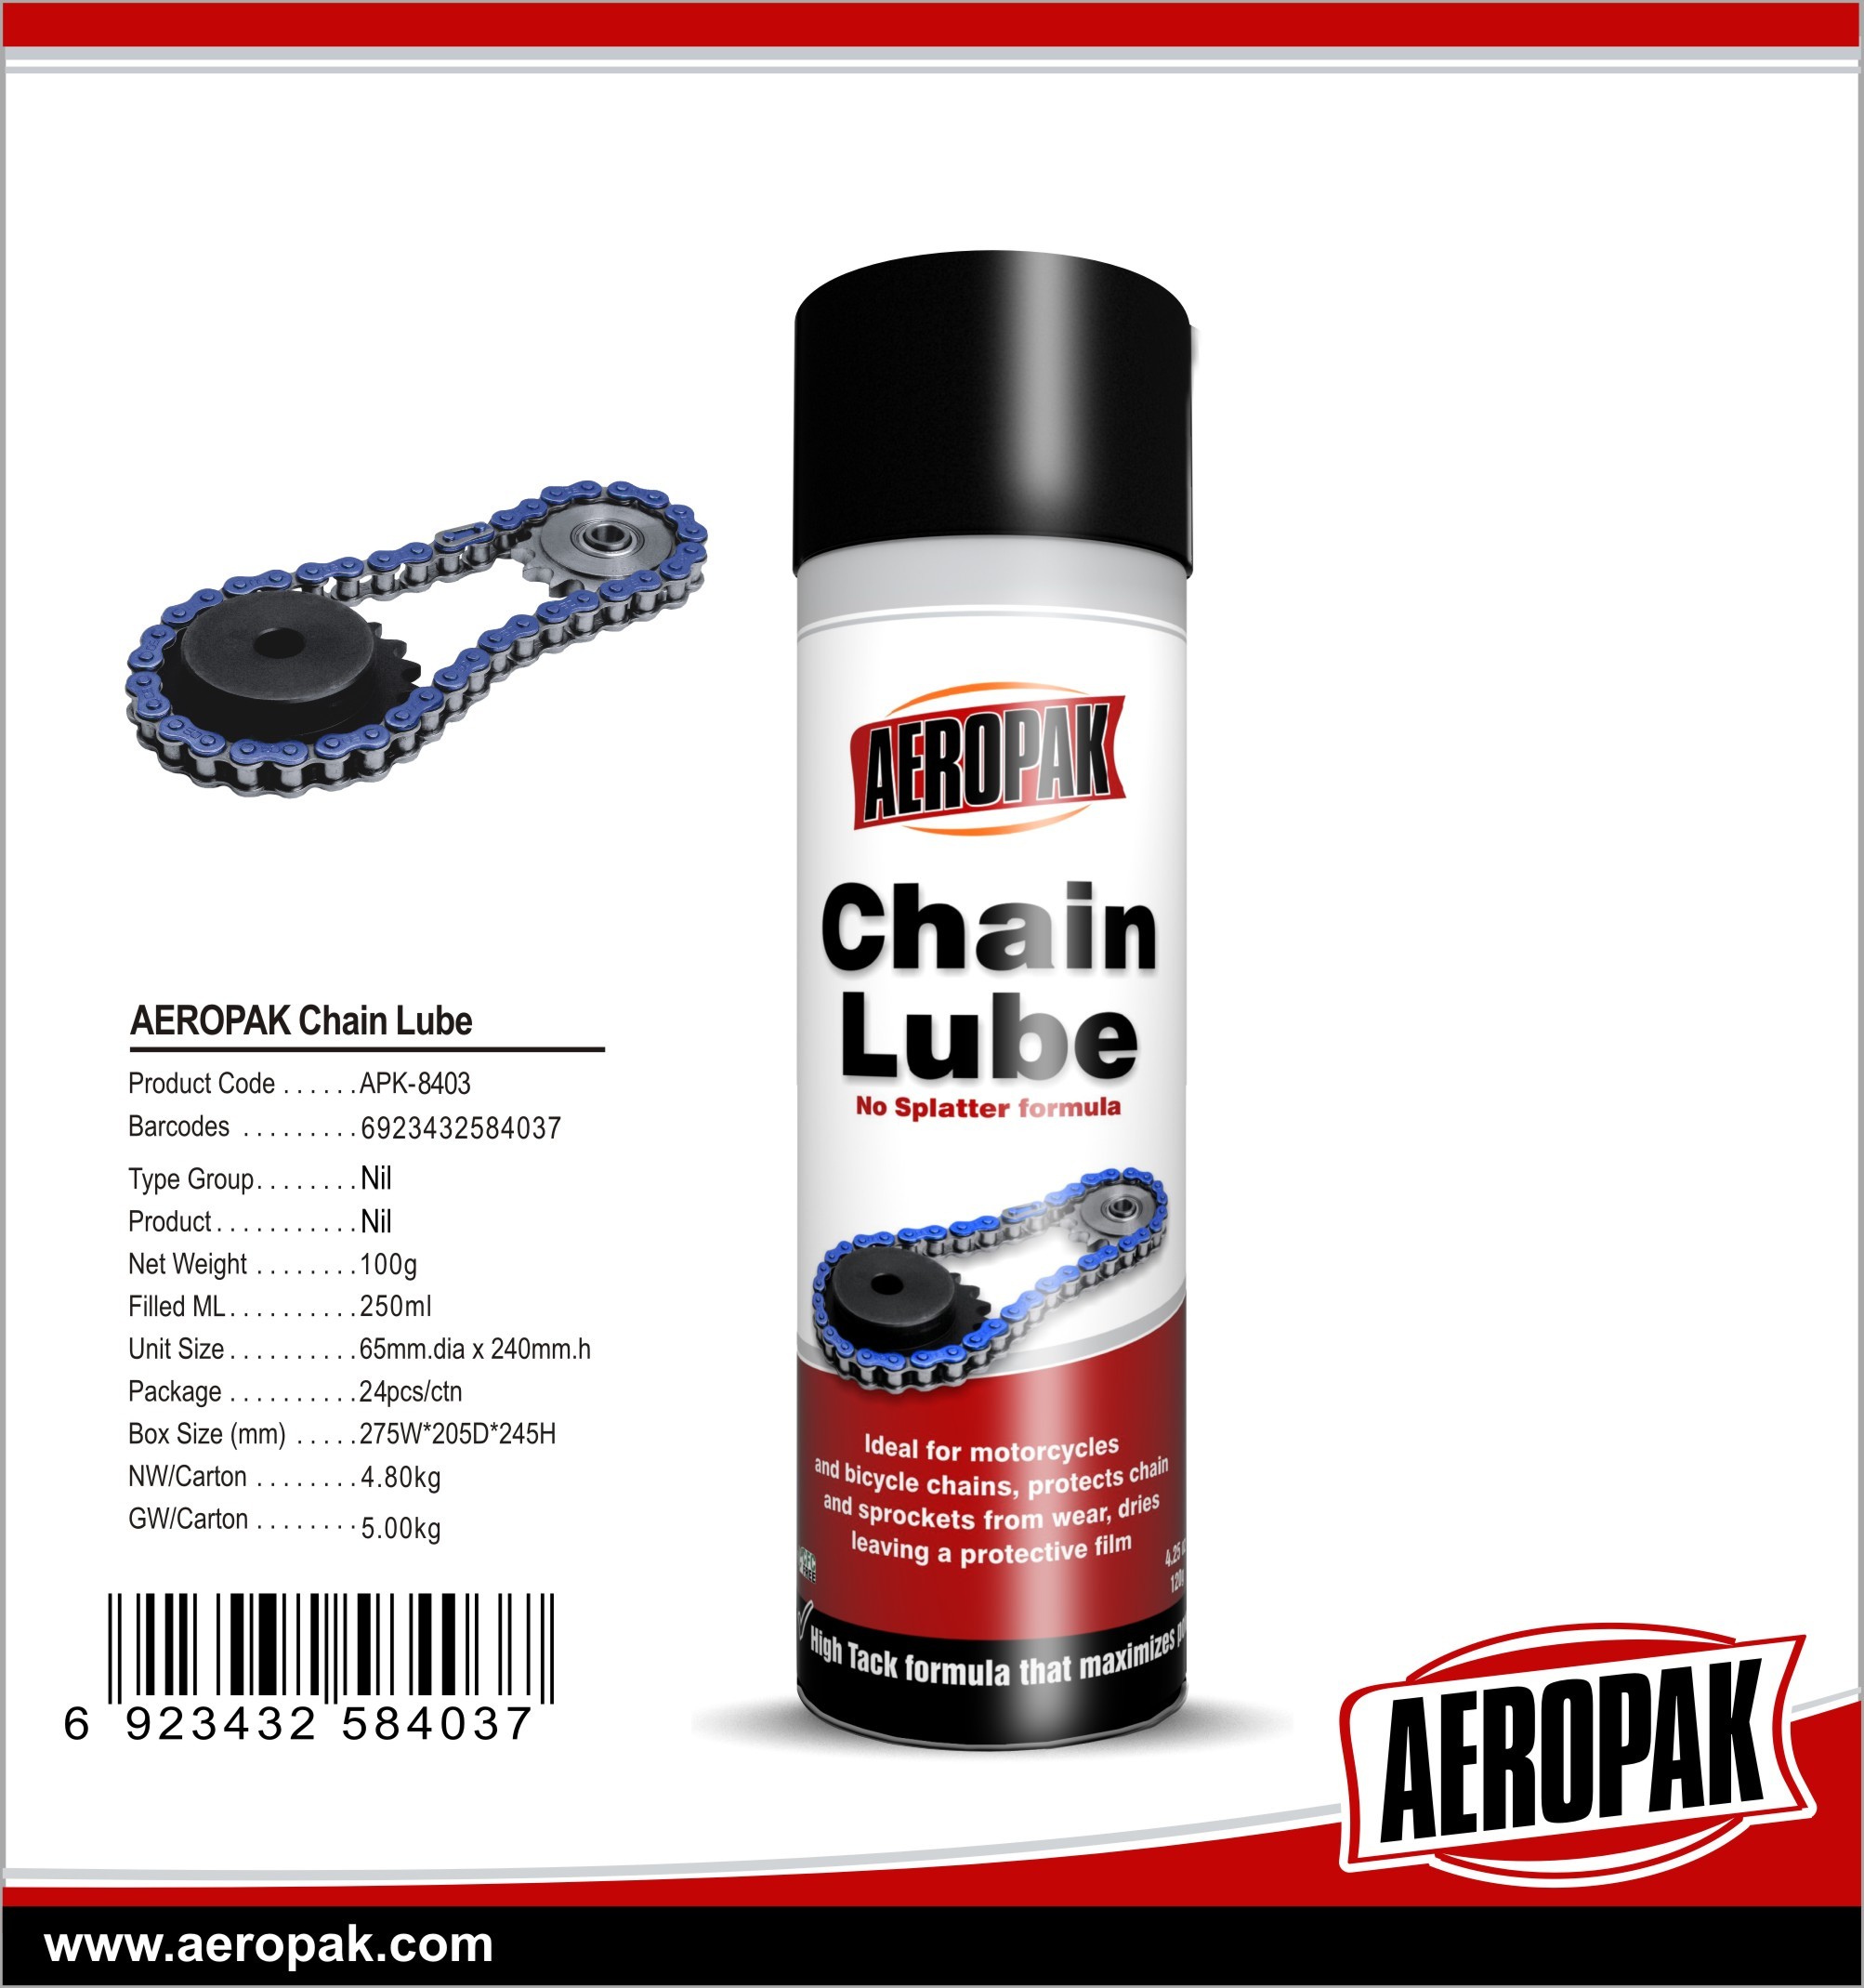  AEROPAK 500ML aerosol spray can Chain Lube for Motorcycles and Bicycle chains Manufactures